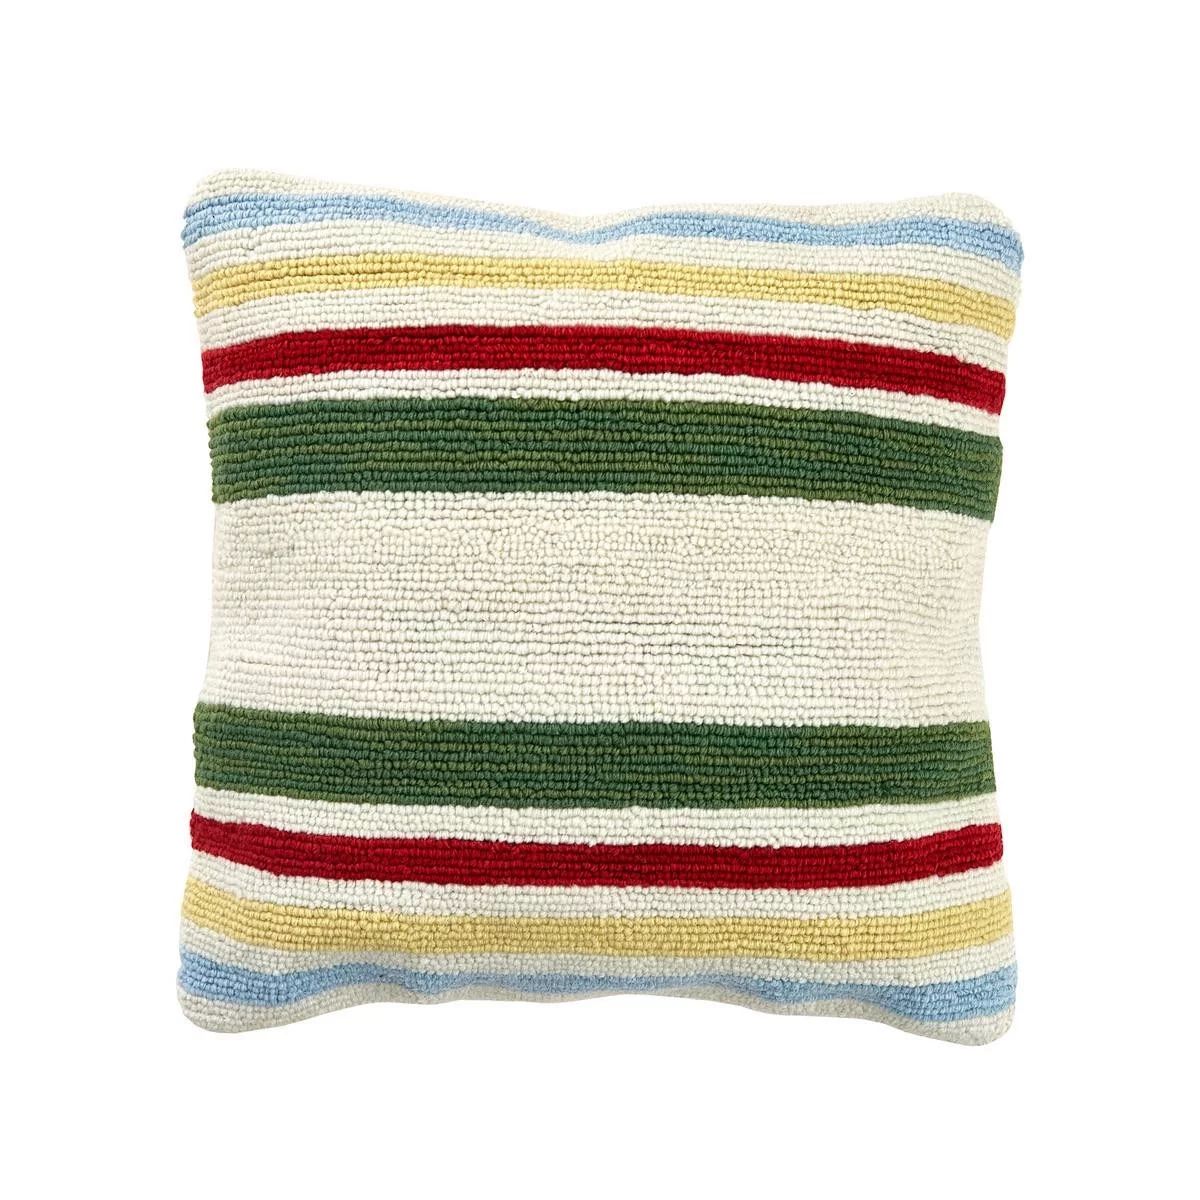 Park Designs Camp Stripe Hooked Pillow - 18x18  USD$80.44You save $0.00     Price when purchased ... | Walmart (US)